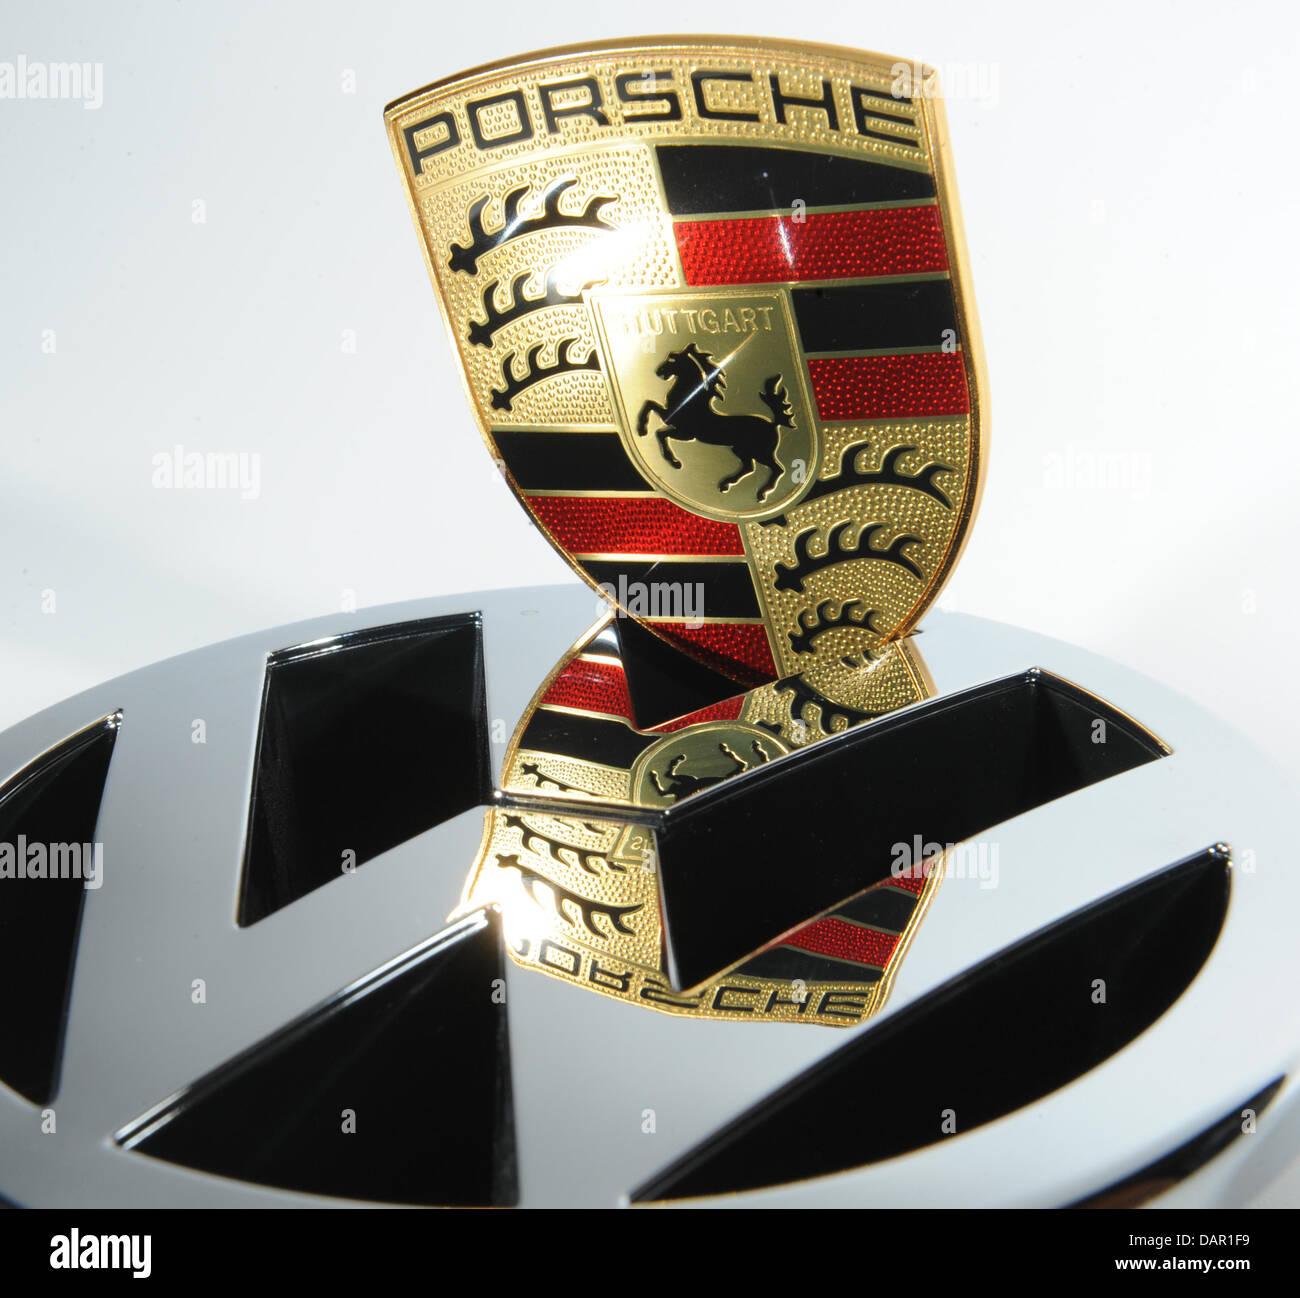 ILLUSTRATION - The illustration shows the logos of German car manufacturers  Volkswagen (VW) and Porsche in Freiburg, Germany, 09 September 2011. The  two companies have announced that they will not be completing